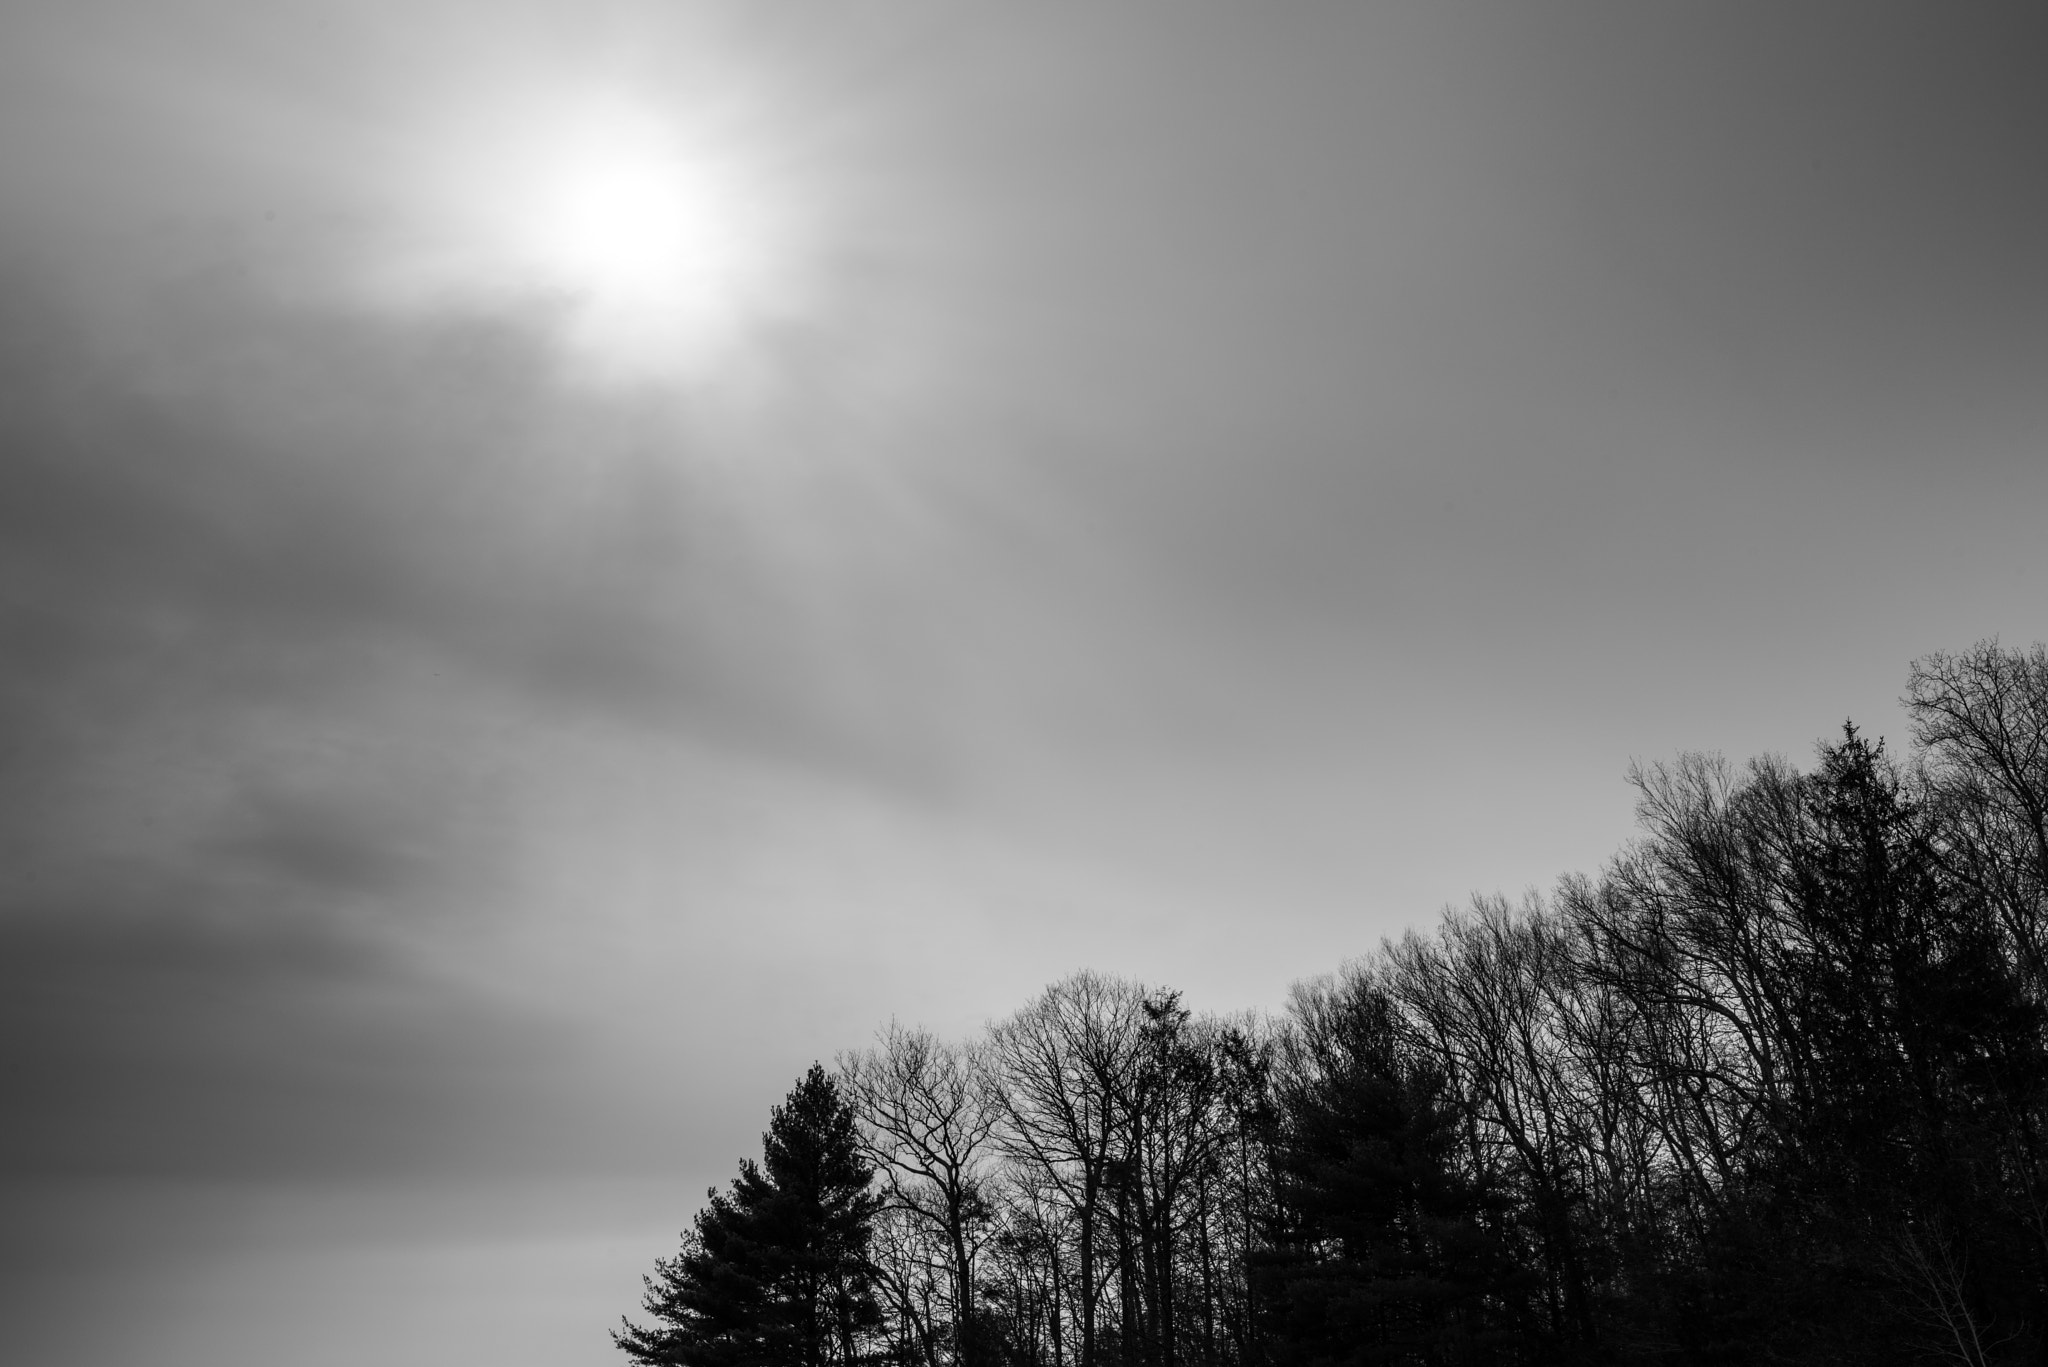 Pentax K-1 + Sigma 35mm F1.4 DG HSM Art sample photo. Sky and trees, black and white photography